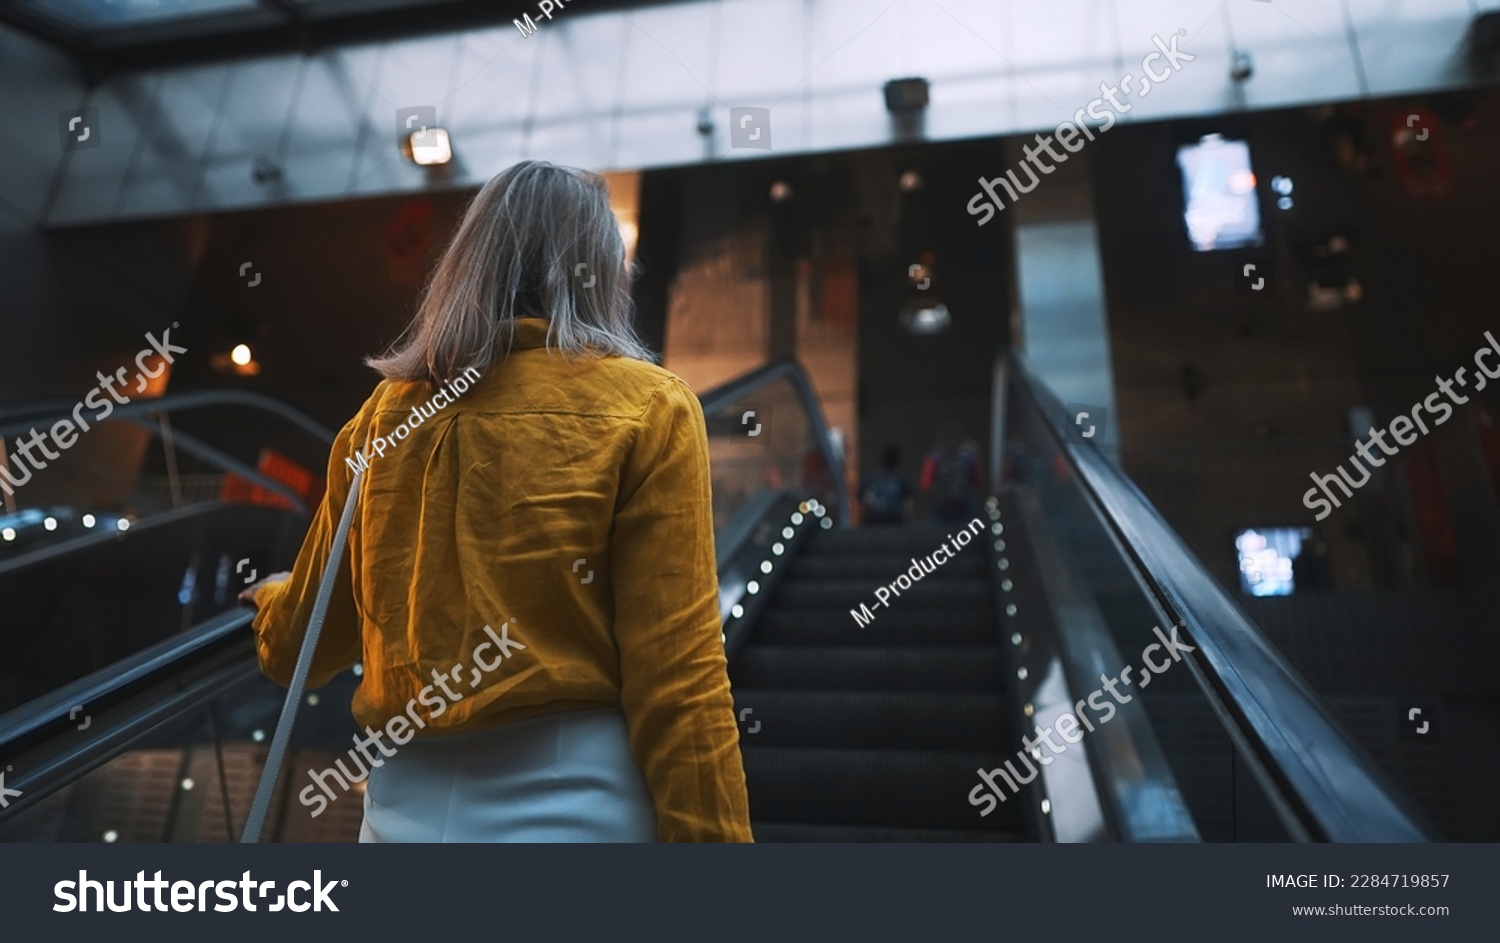 Woman using the escalator in the subway. #2284719857